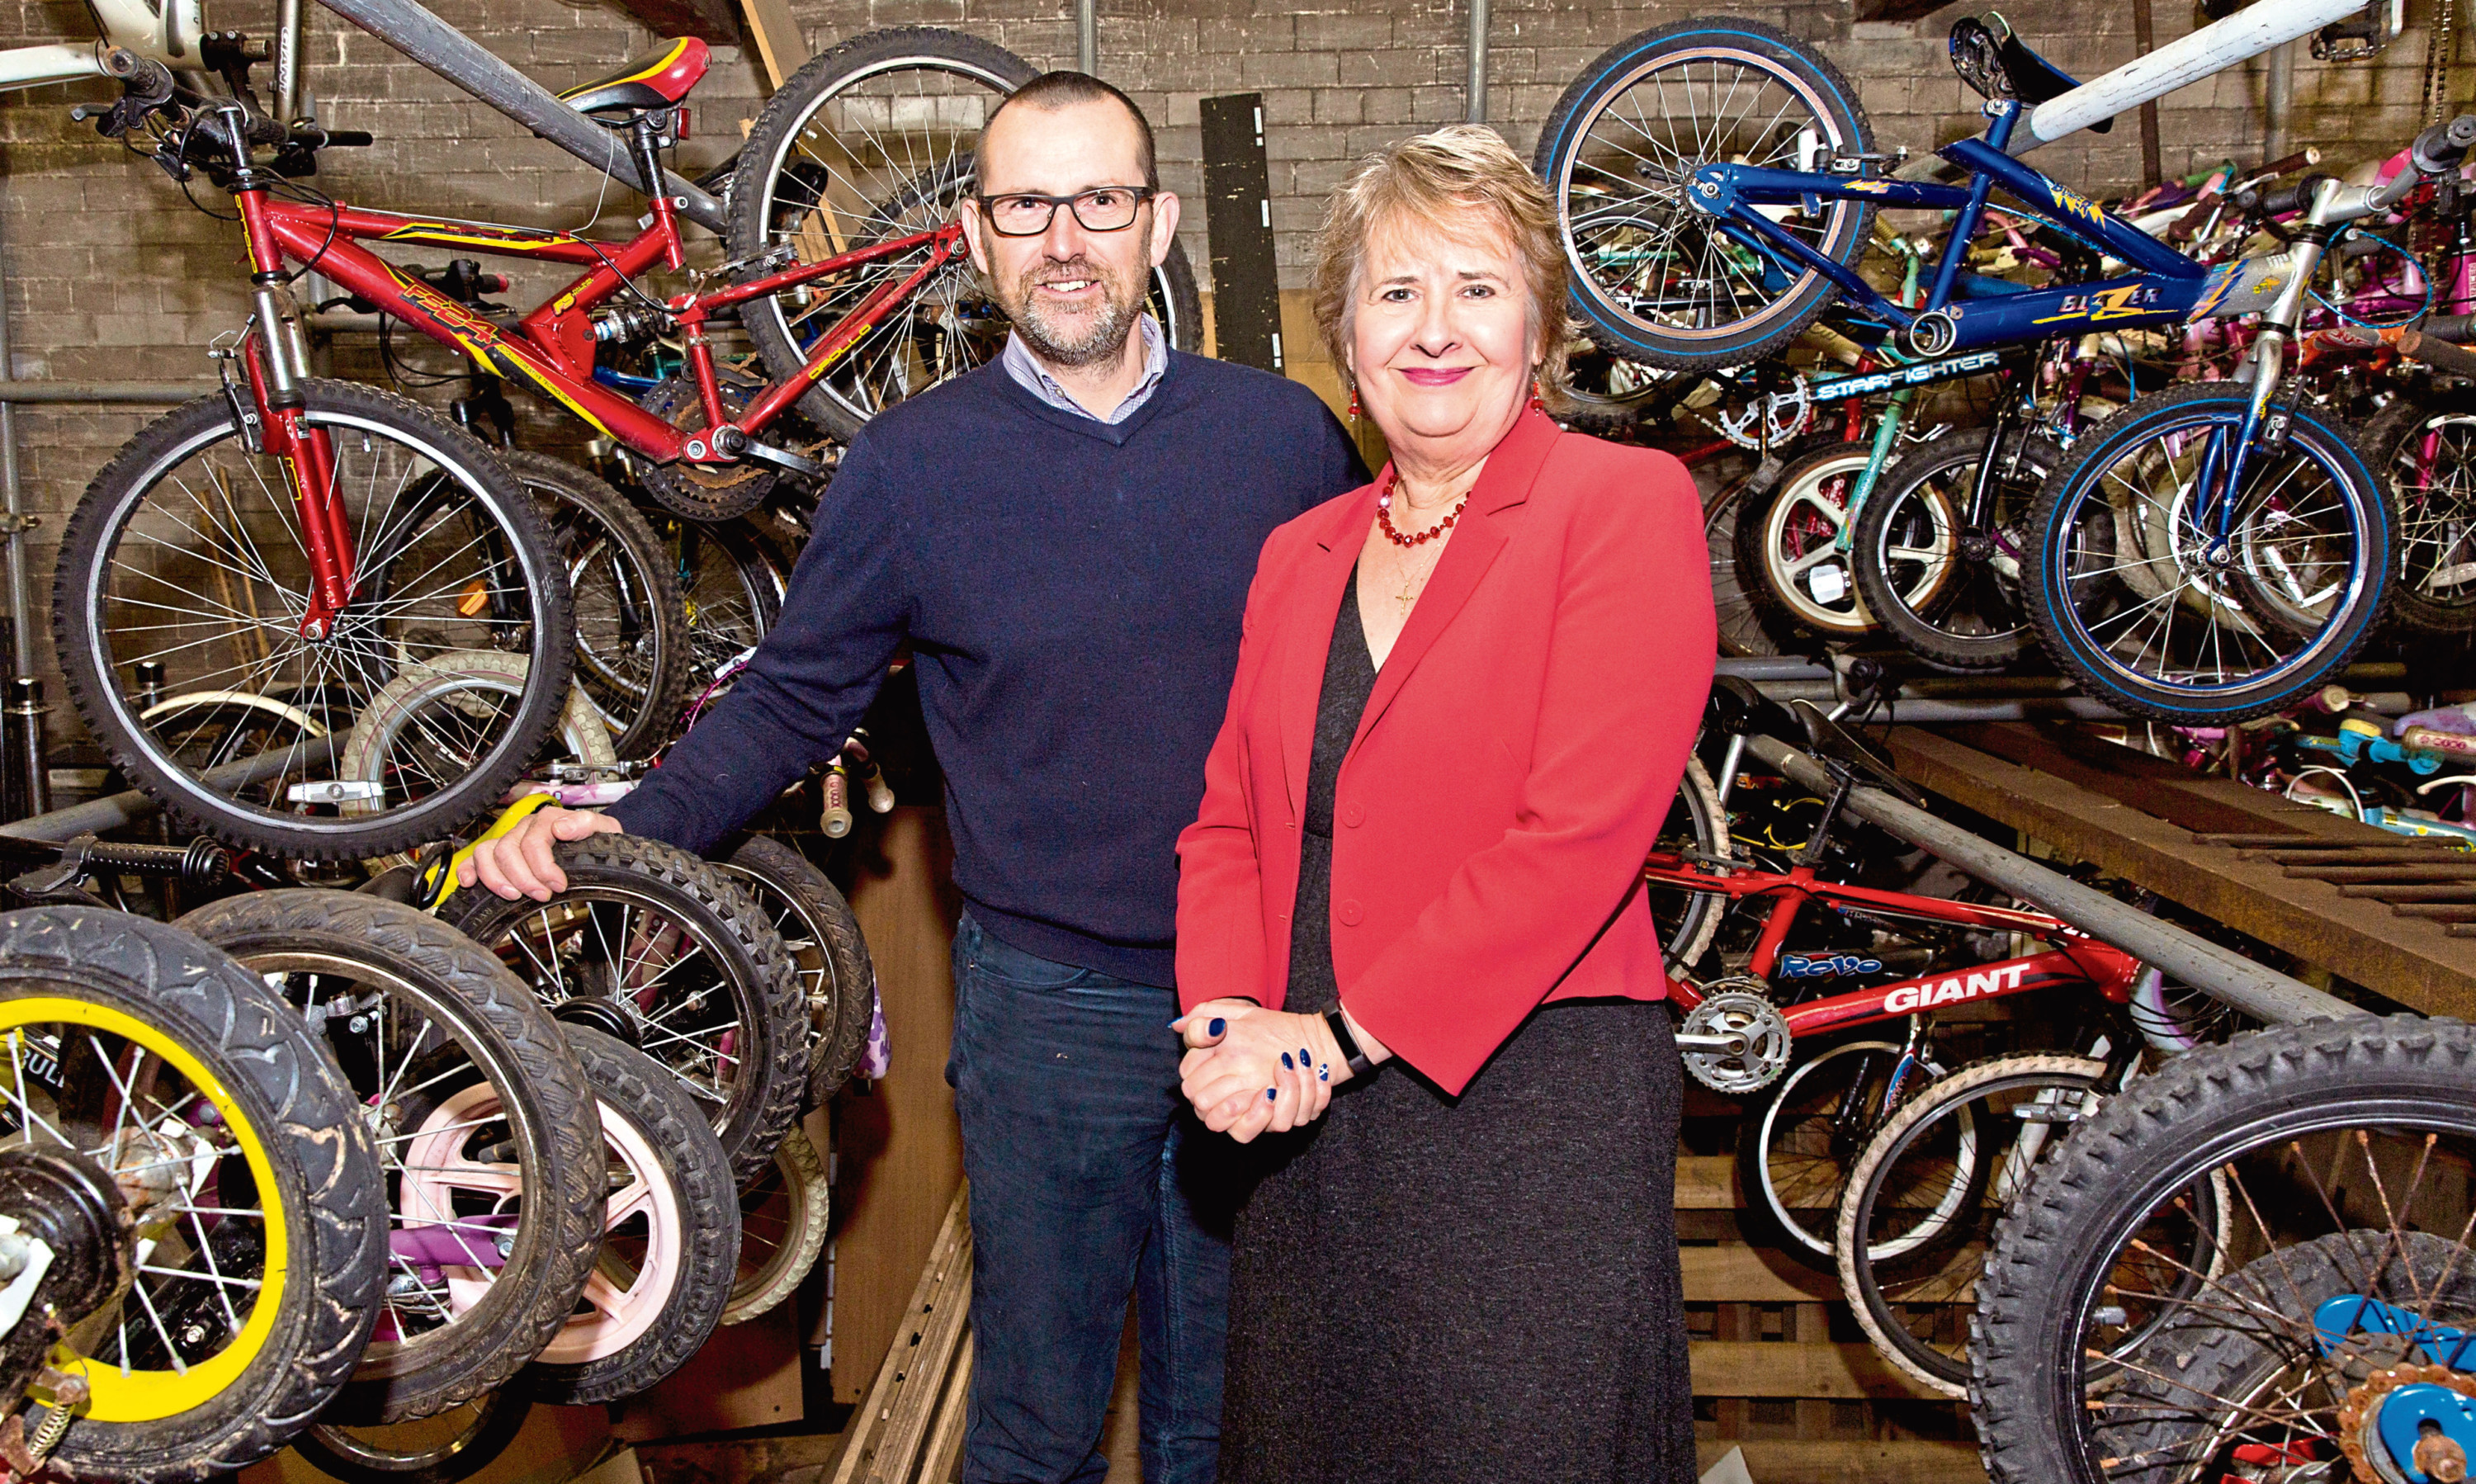 Iain Gulland of Zero Waste Scotland with Scottish Environment Secretary Roseanna Cunningham on a visit to The Bike Station of Perth, an organisation promoting the repair and re-use of bicycles.